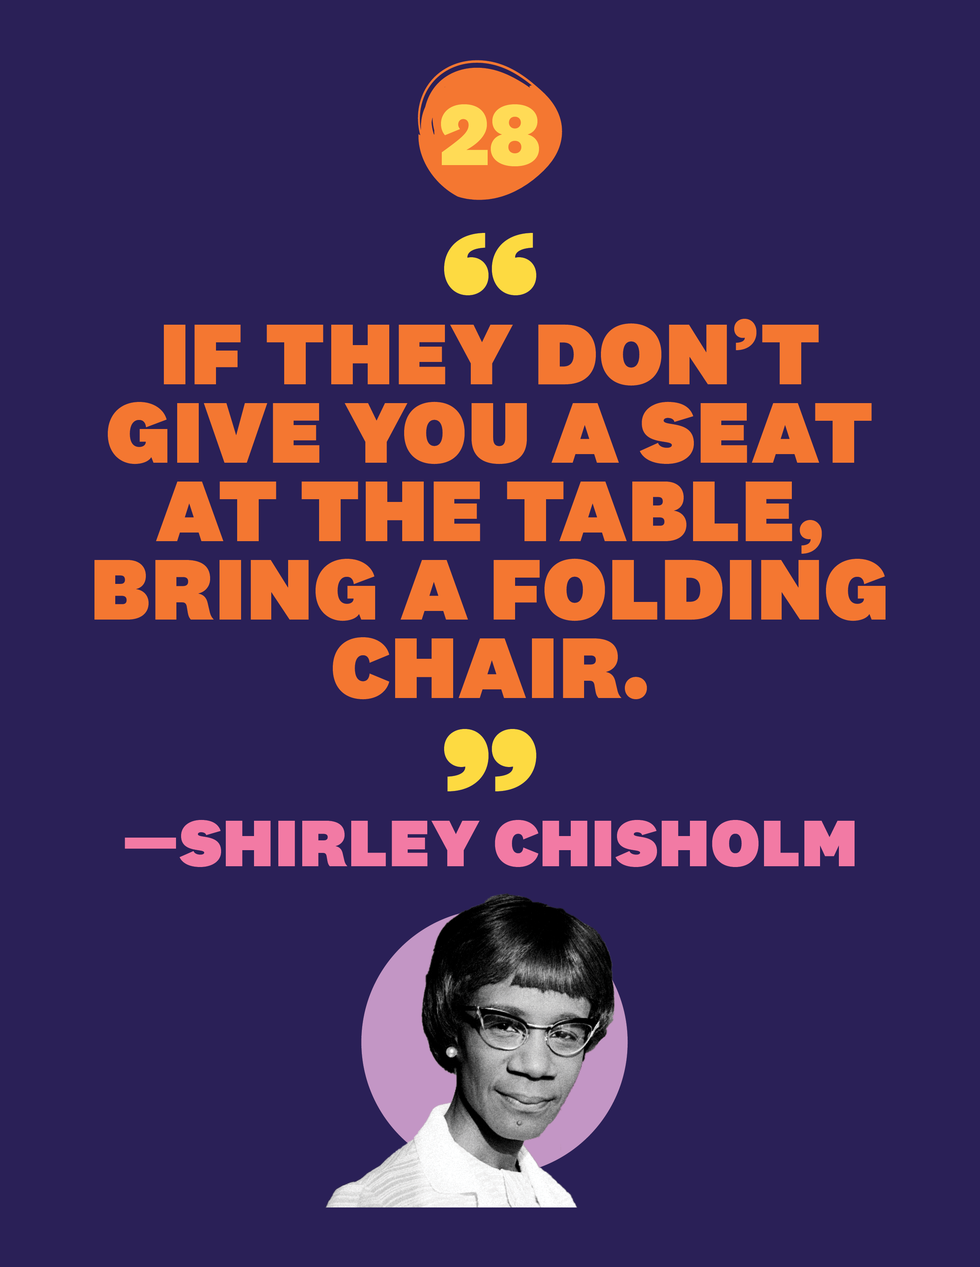 "if they don’t give you a seat at the table, bring a folding chair"—shirley chisholm